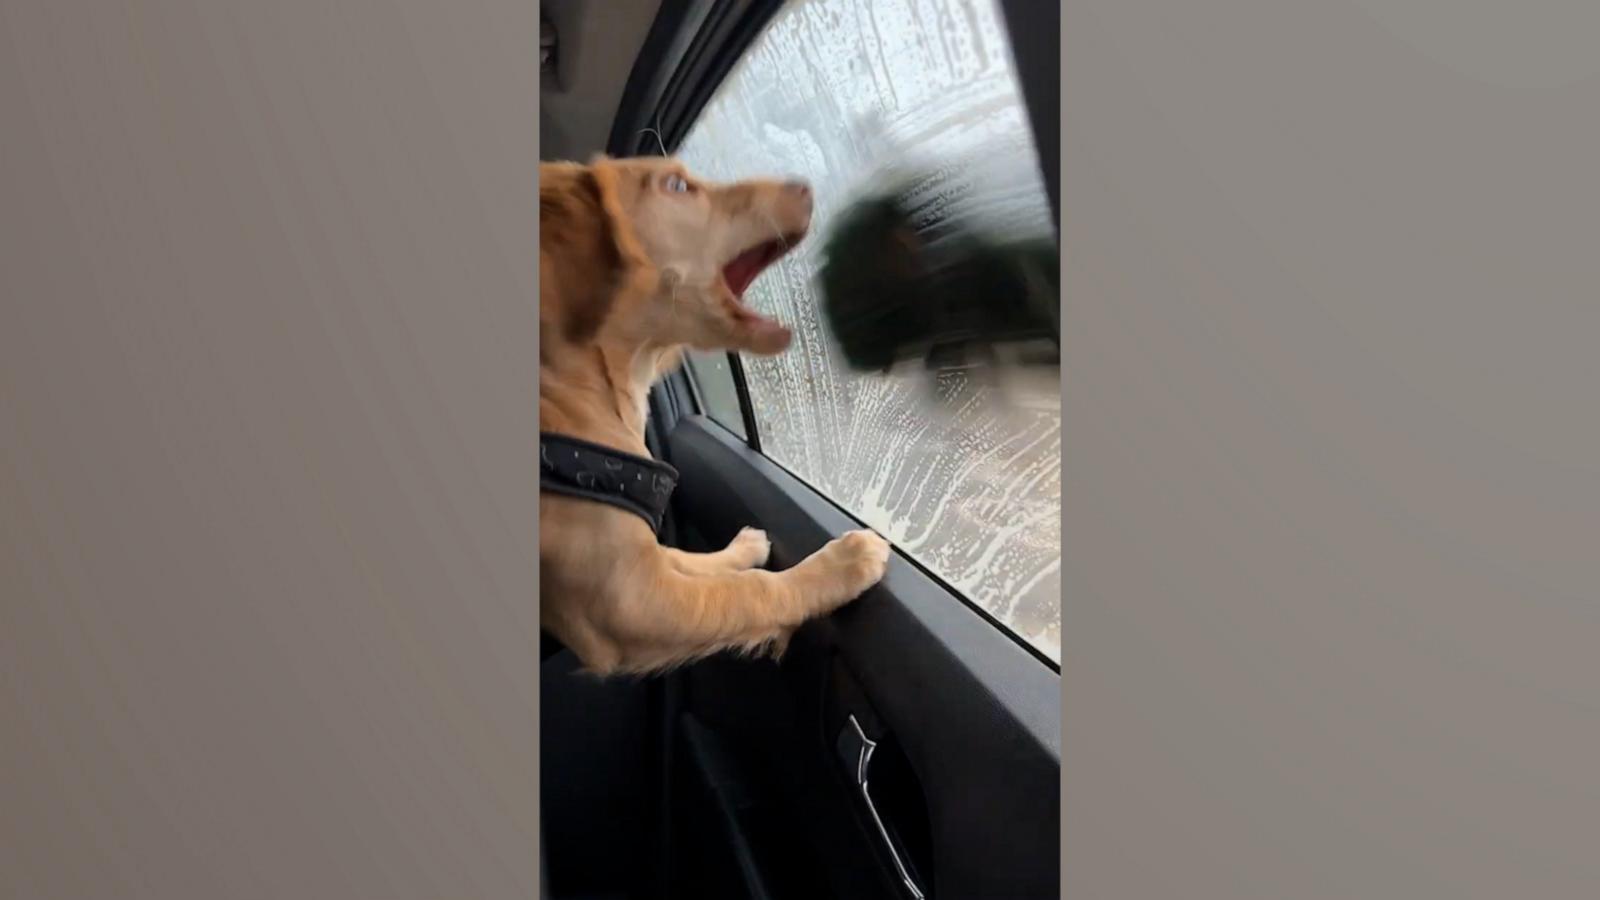 VIDEO: Cocker spaniel visits car wash and can't get enough of the cleaning brush